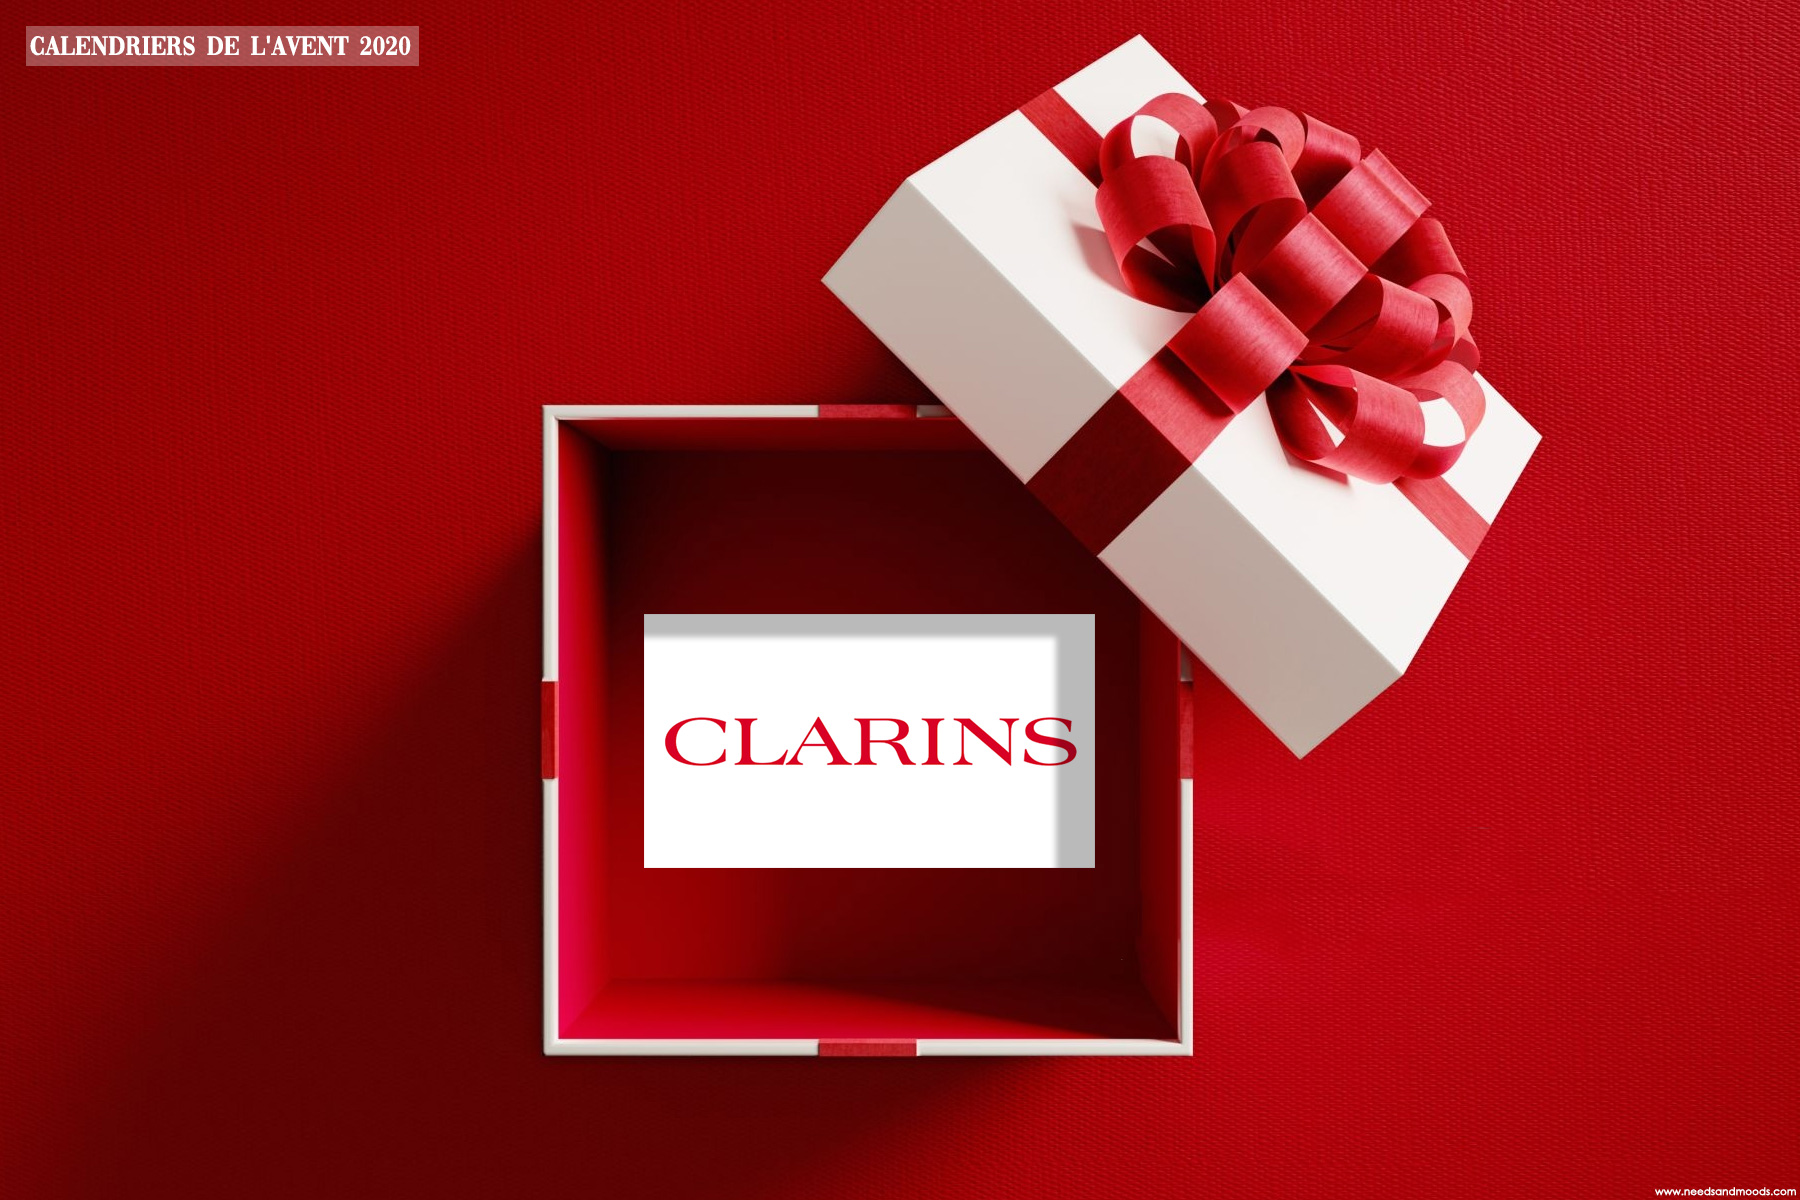 clarins-calendrier-avent-2020